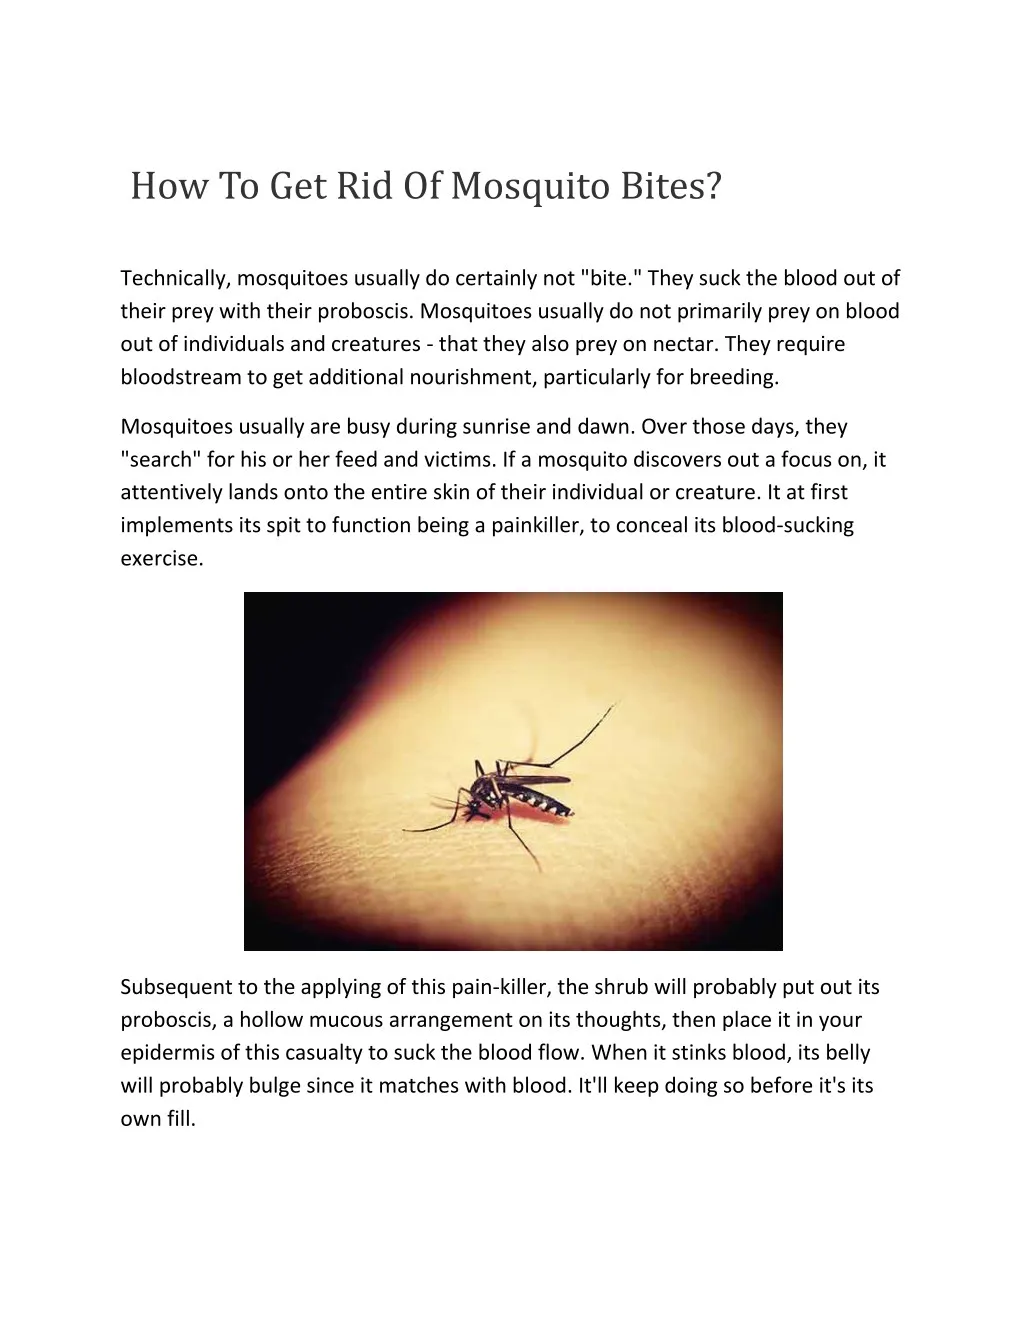 how to get rid of mosquito bites